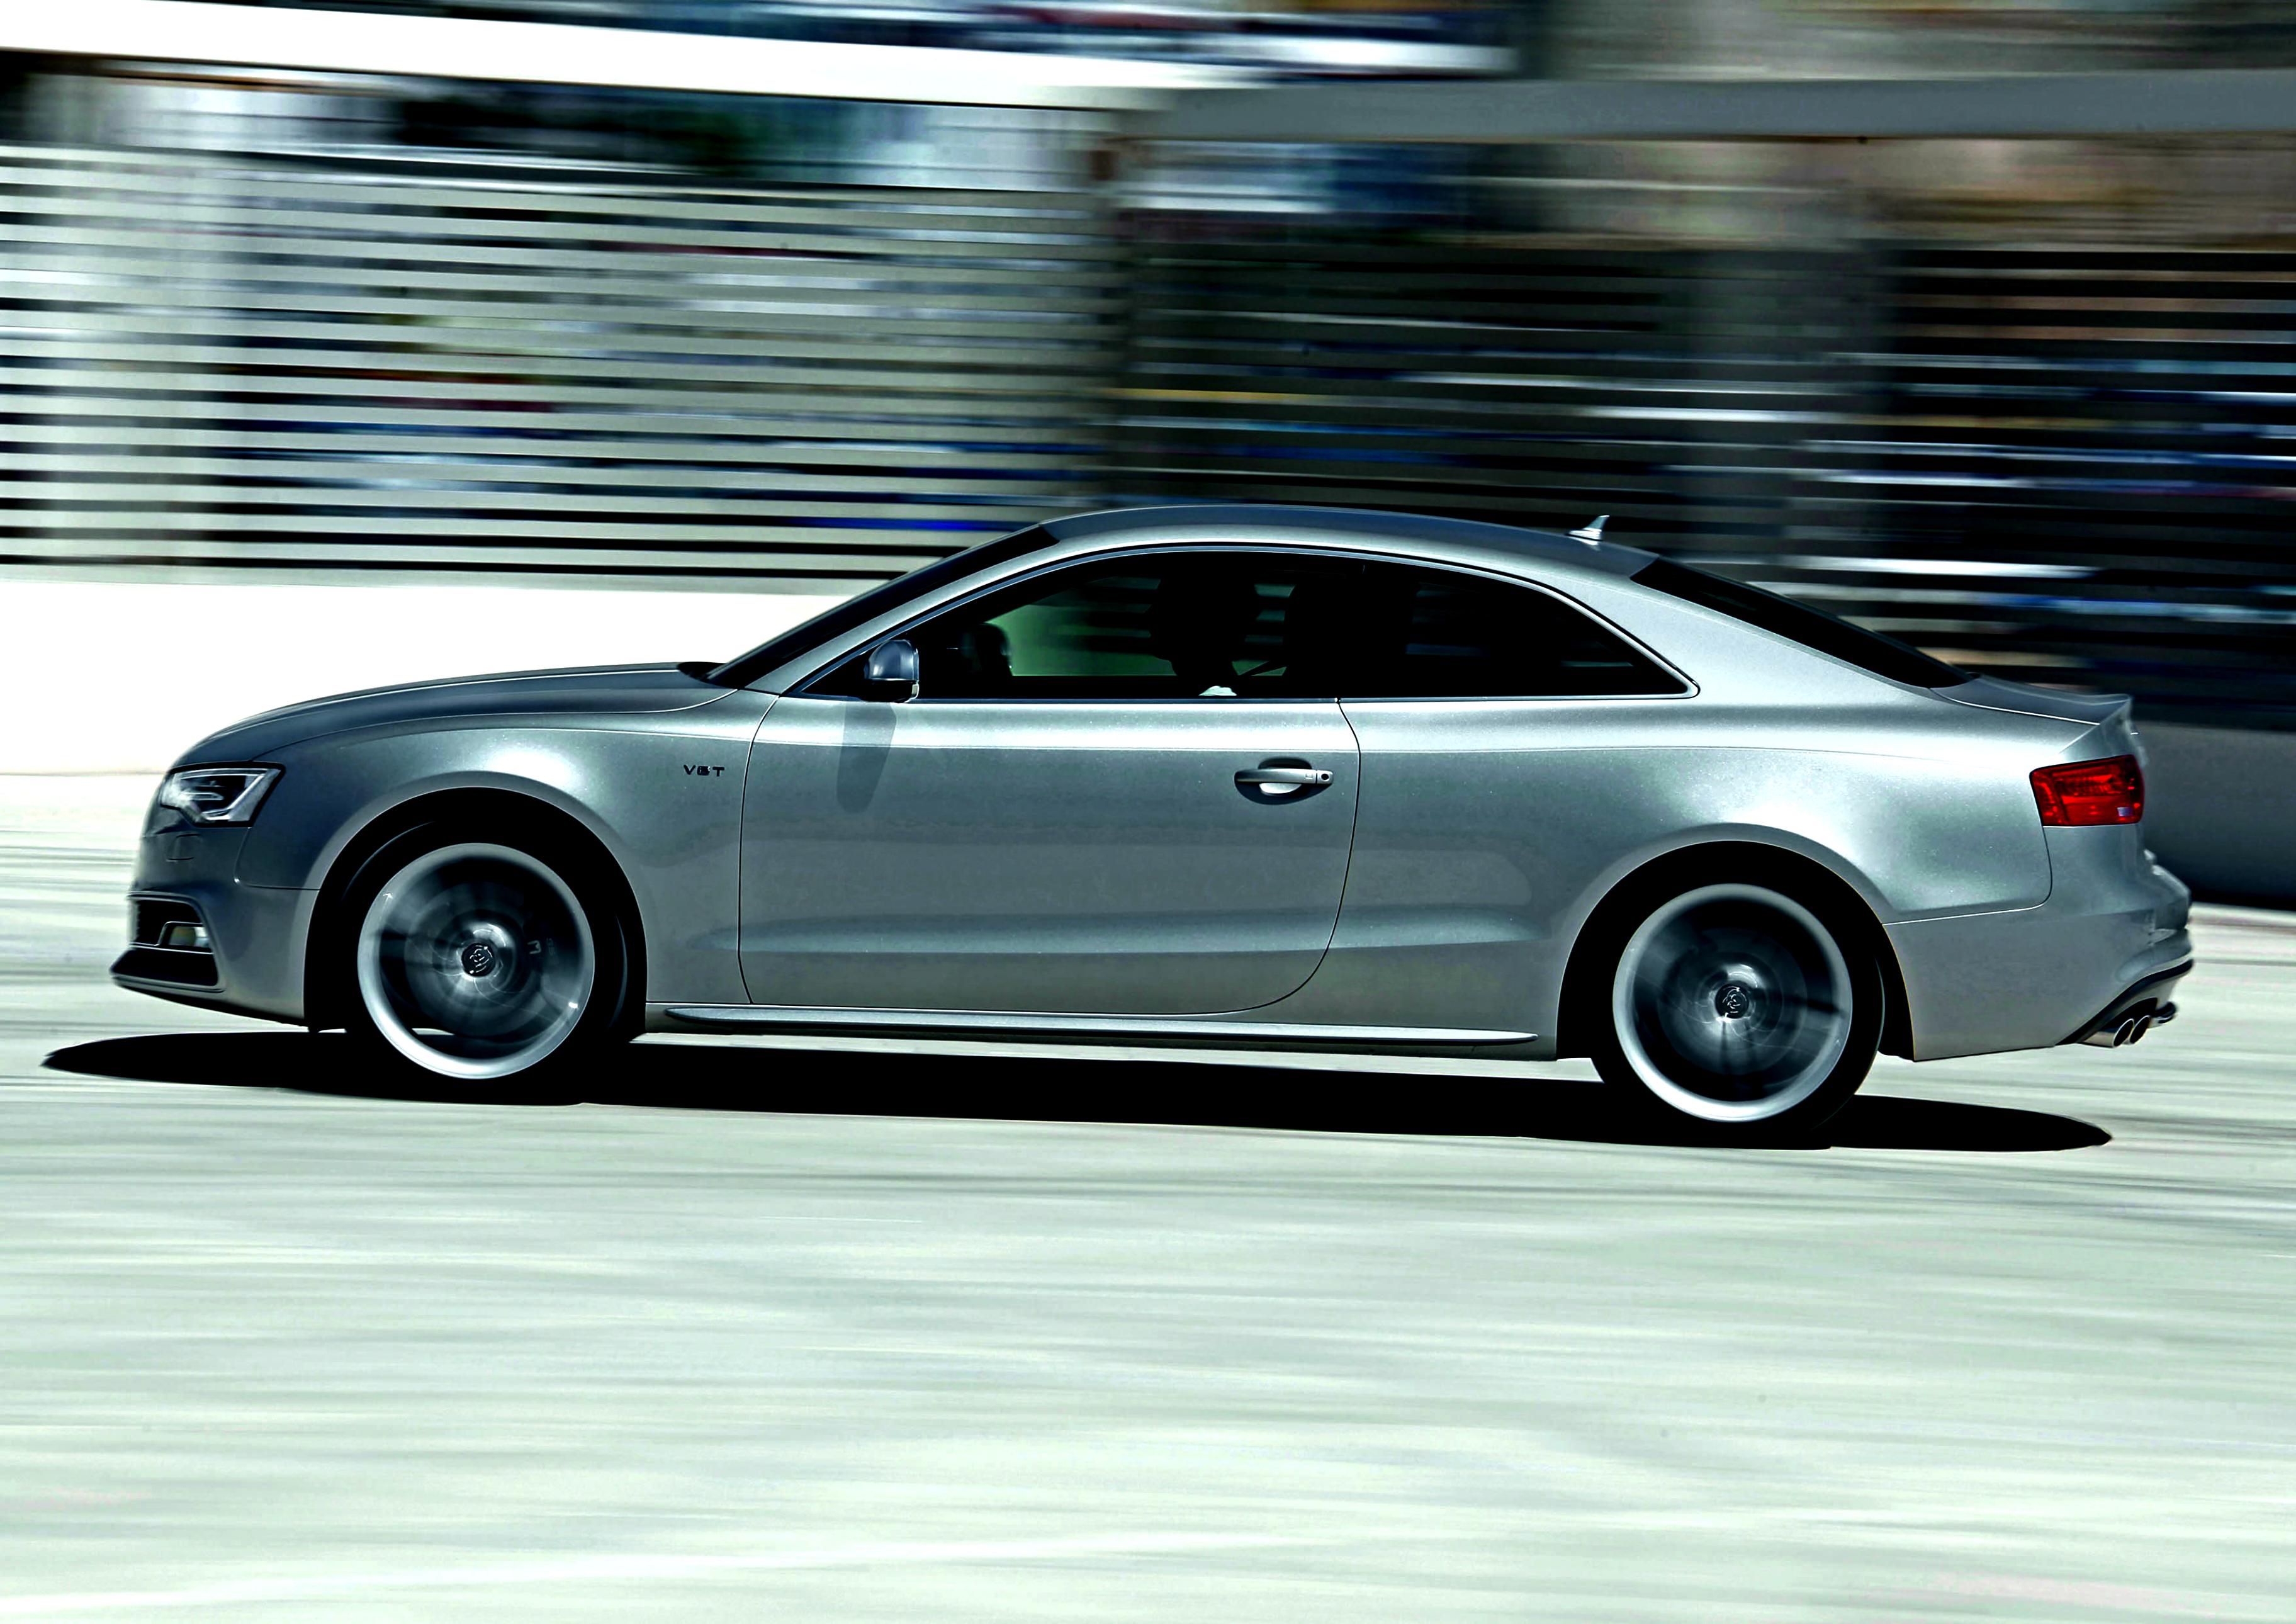 Audi S5 Coupe 2012 #17